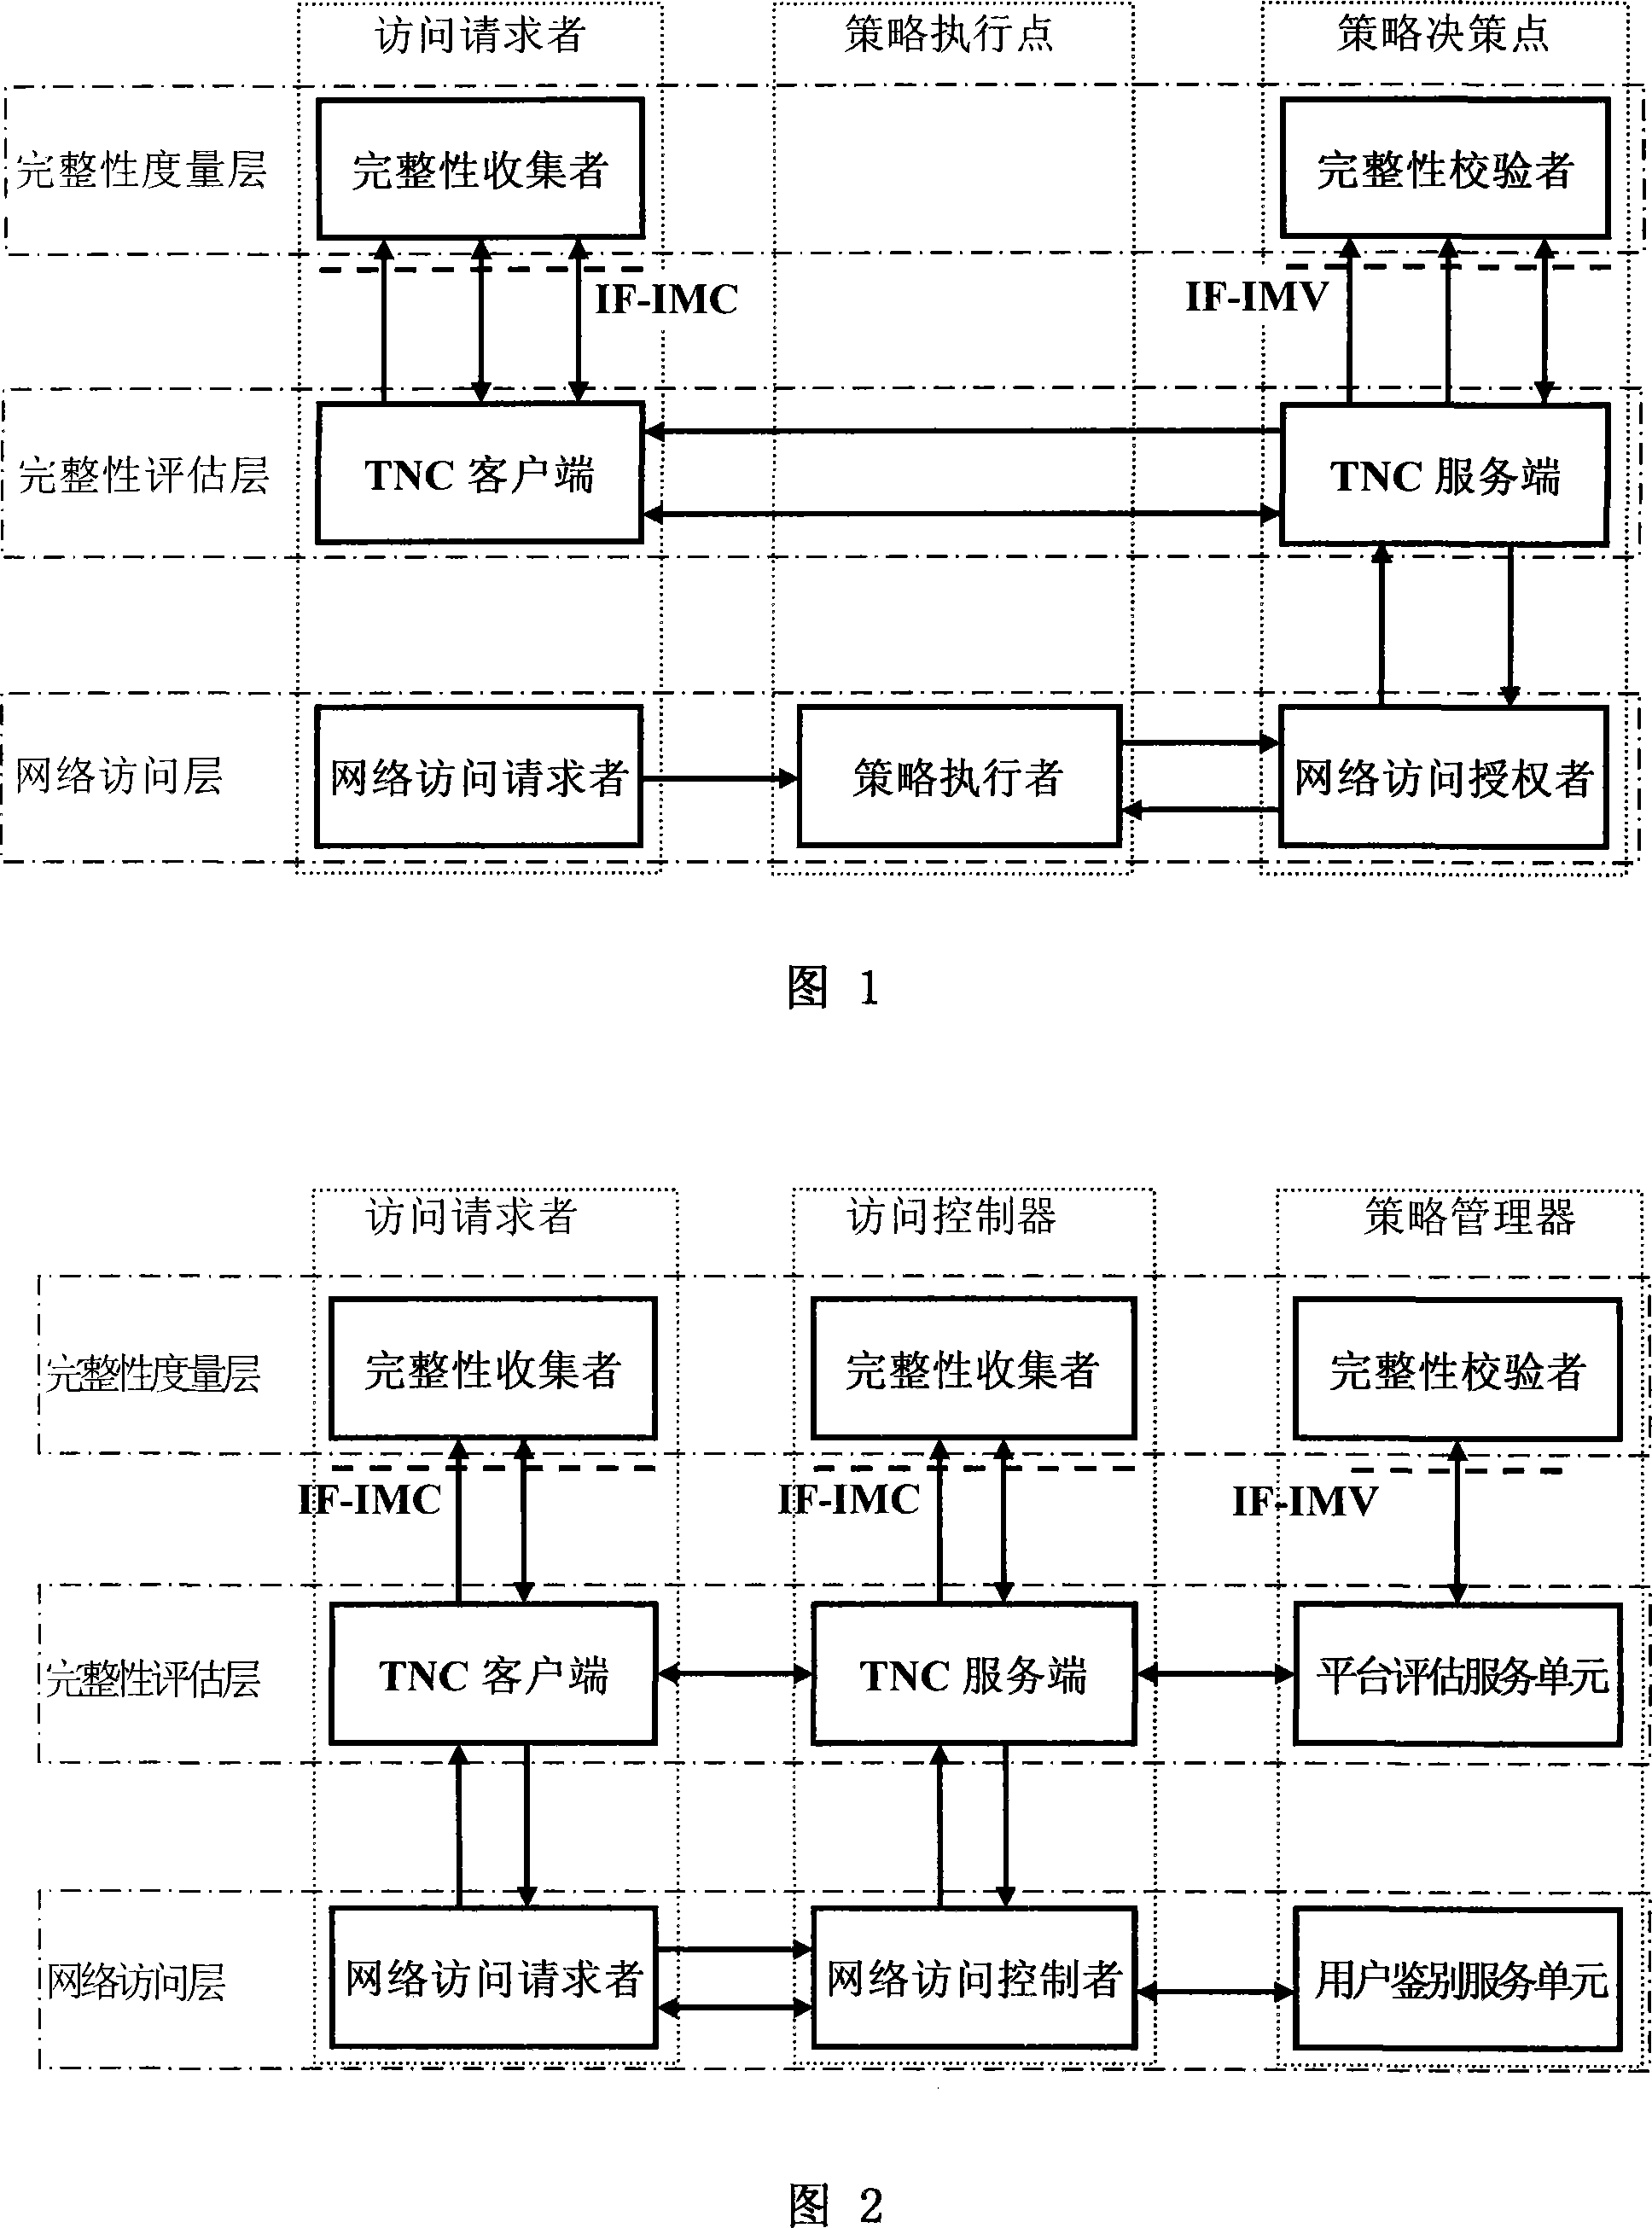 A trusted network connection method based on three-element peer authentication